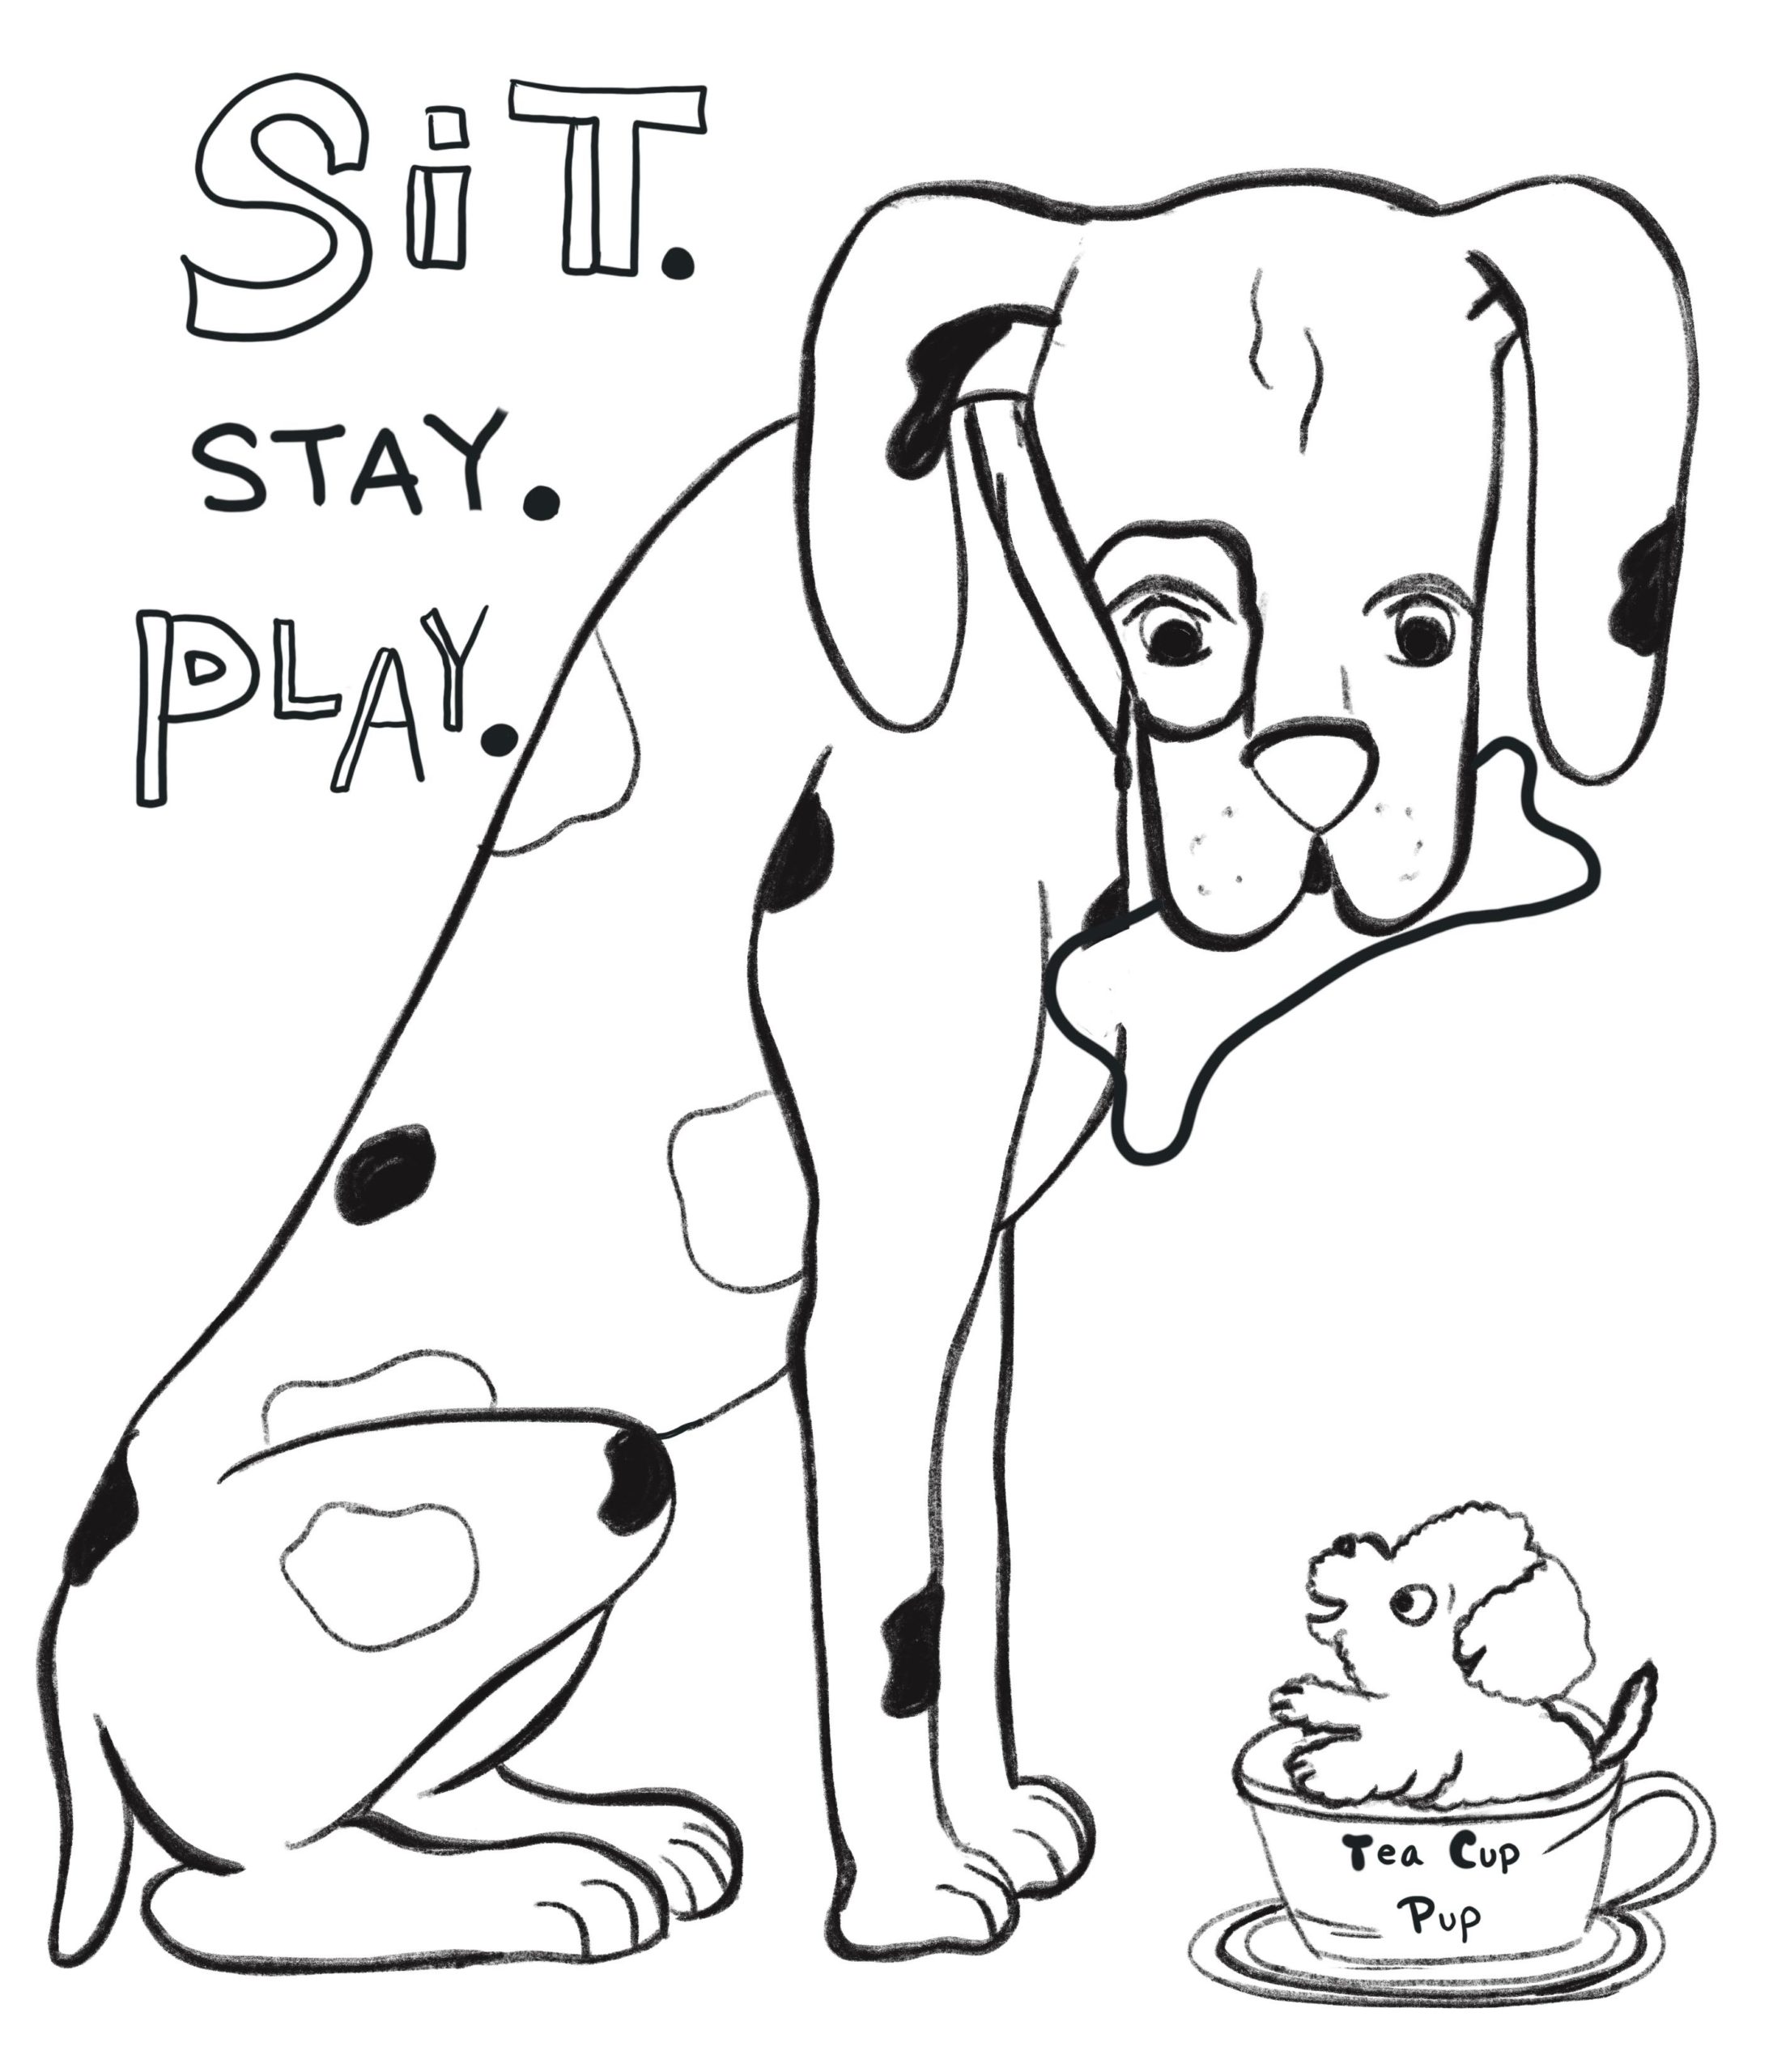 sit stay play - a drawing to color in by Aimee Haburjak